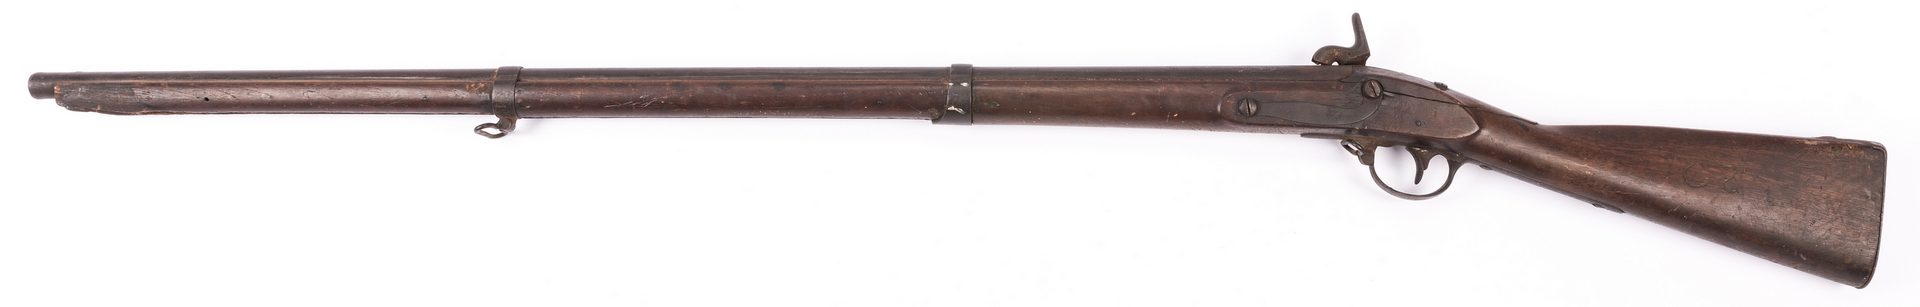 Lot 504: U.S. Asa Waters Contract Musket, 1829